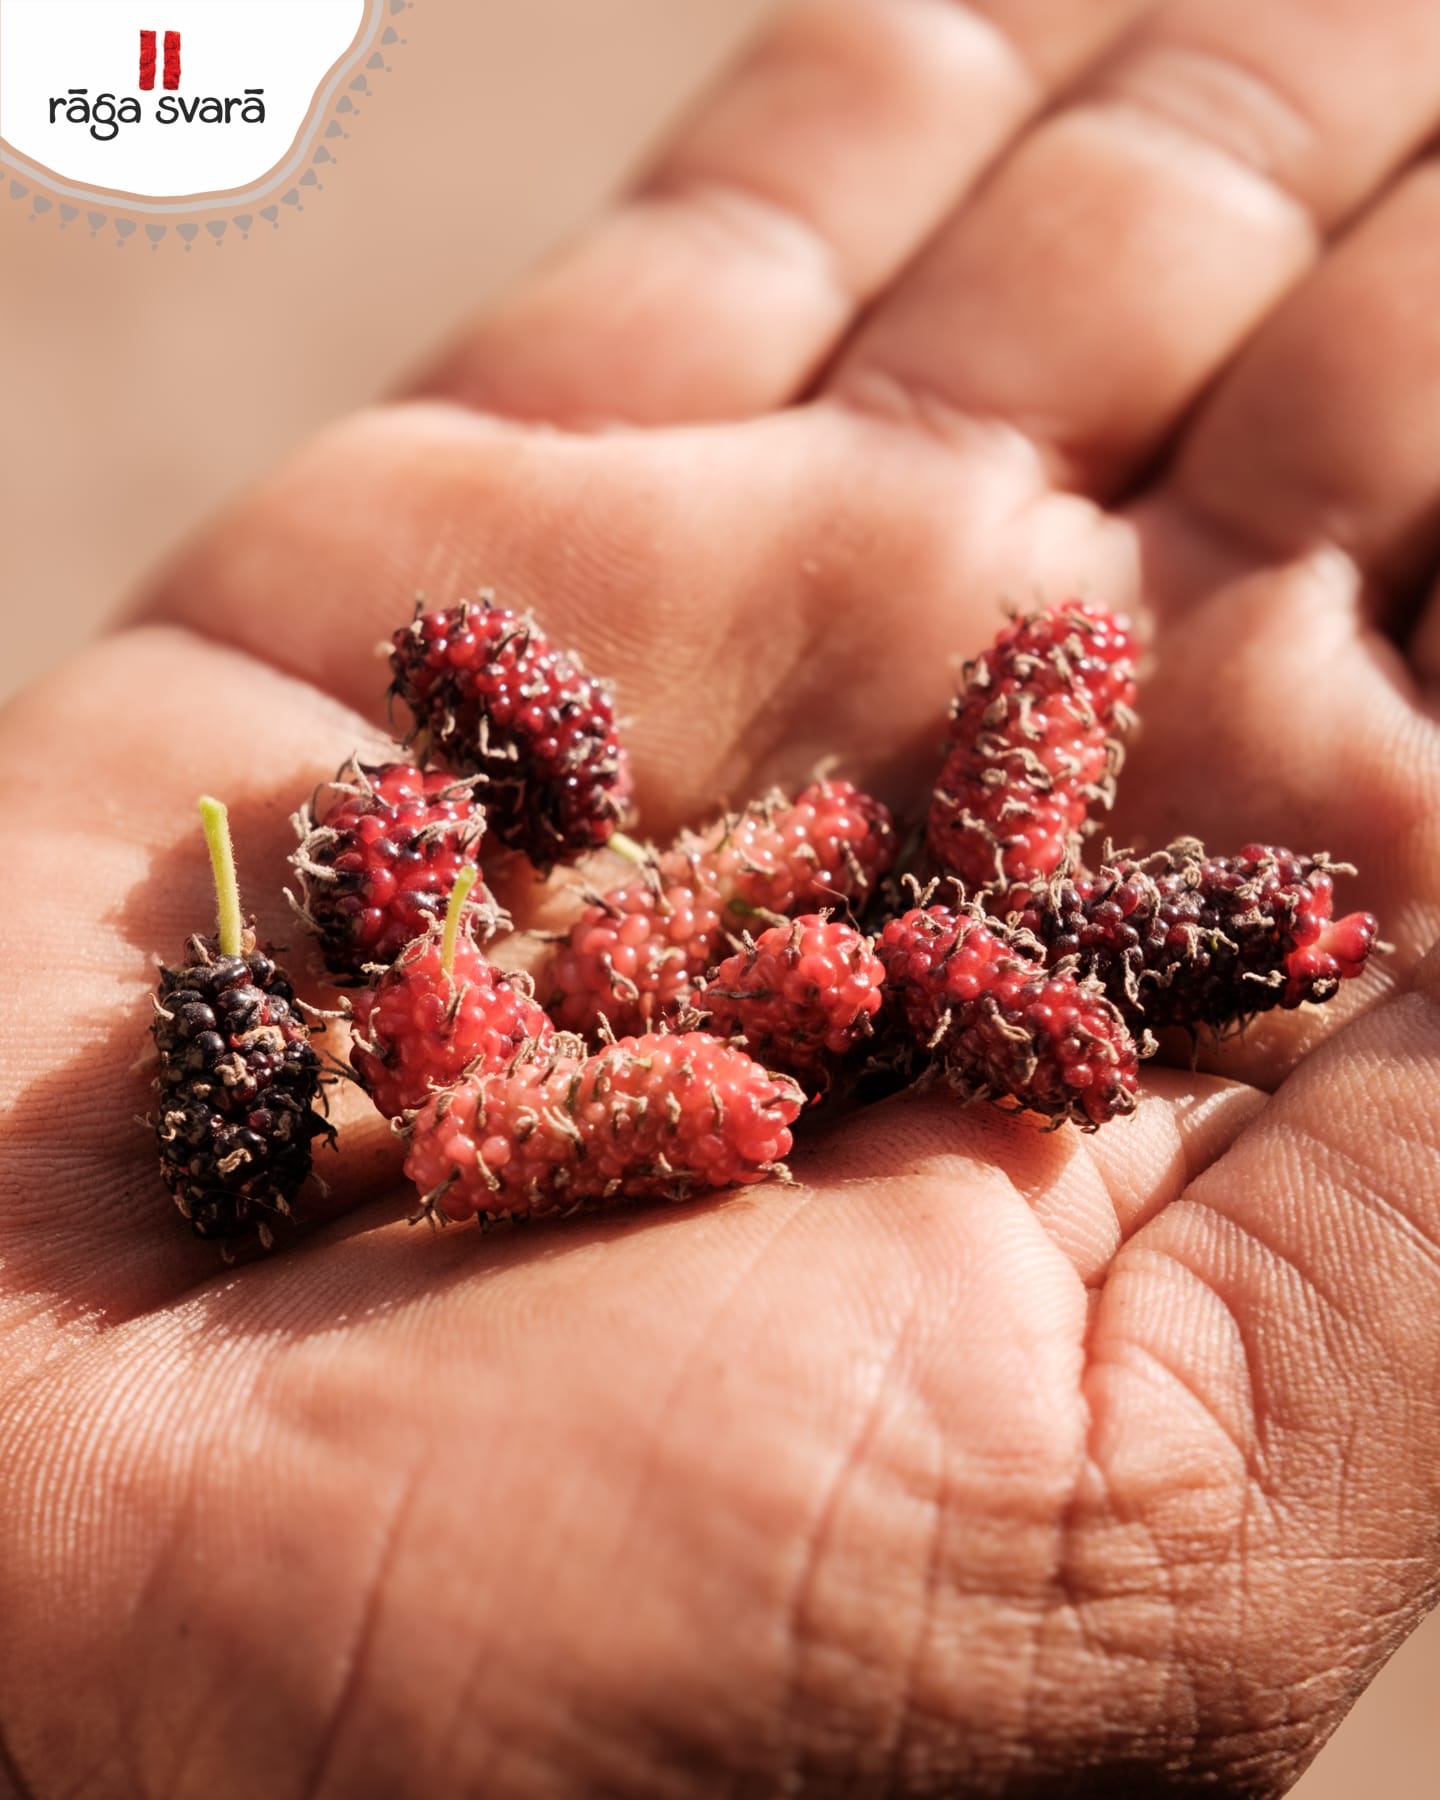 Mulberry - A delightful wild berry